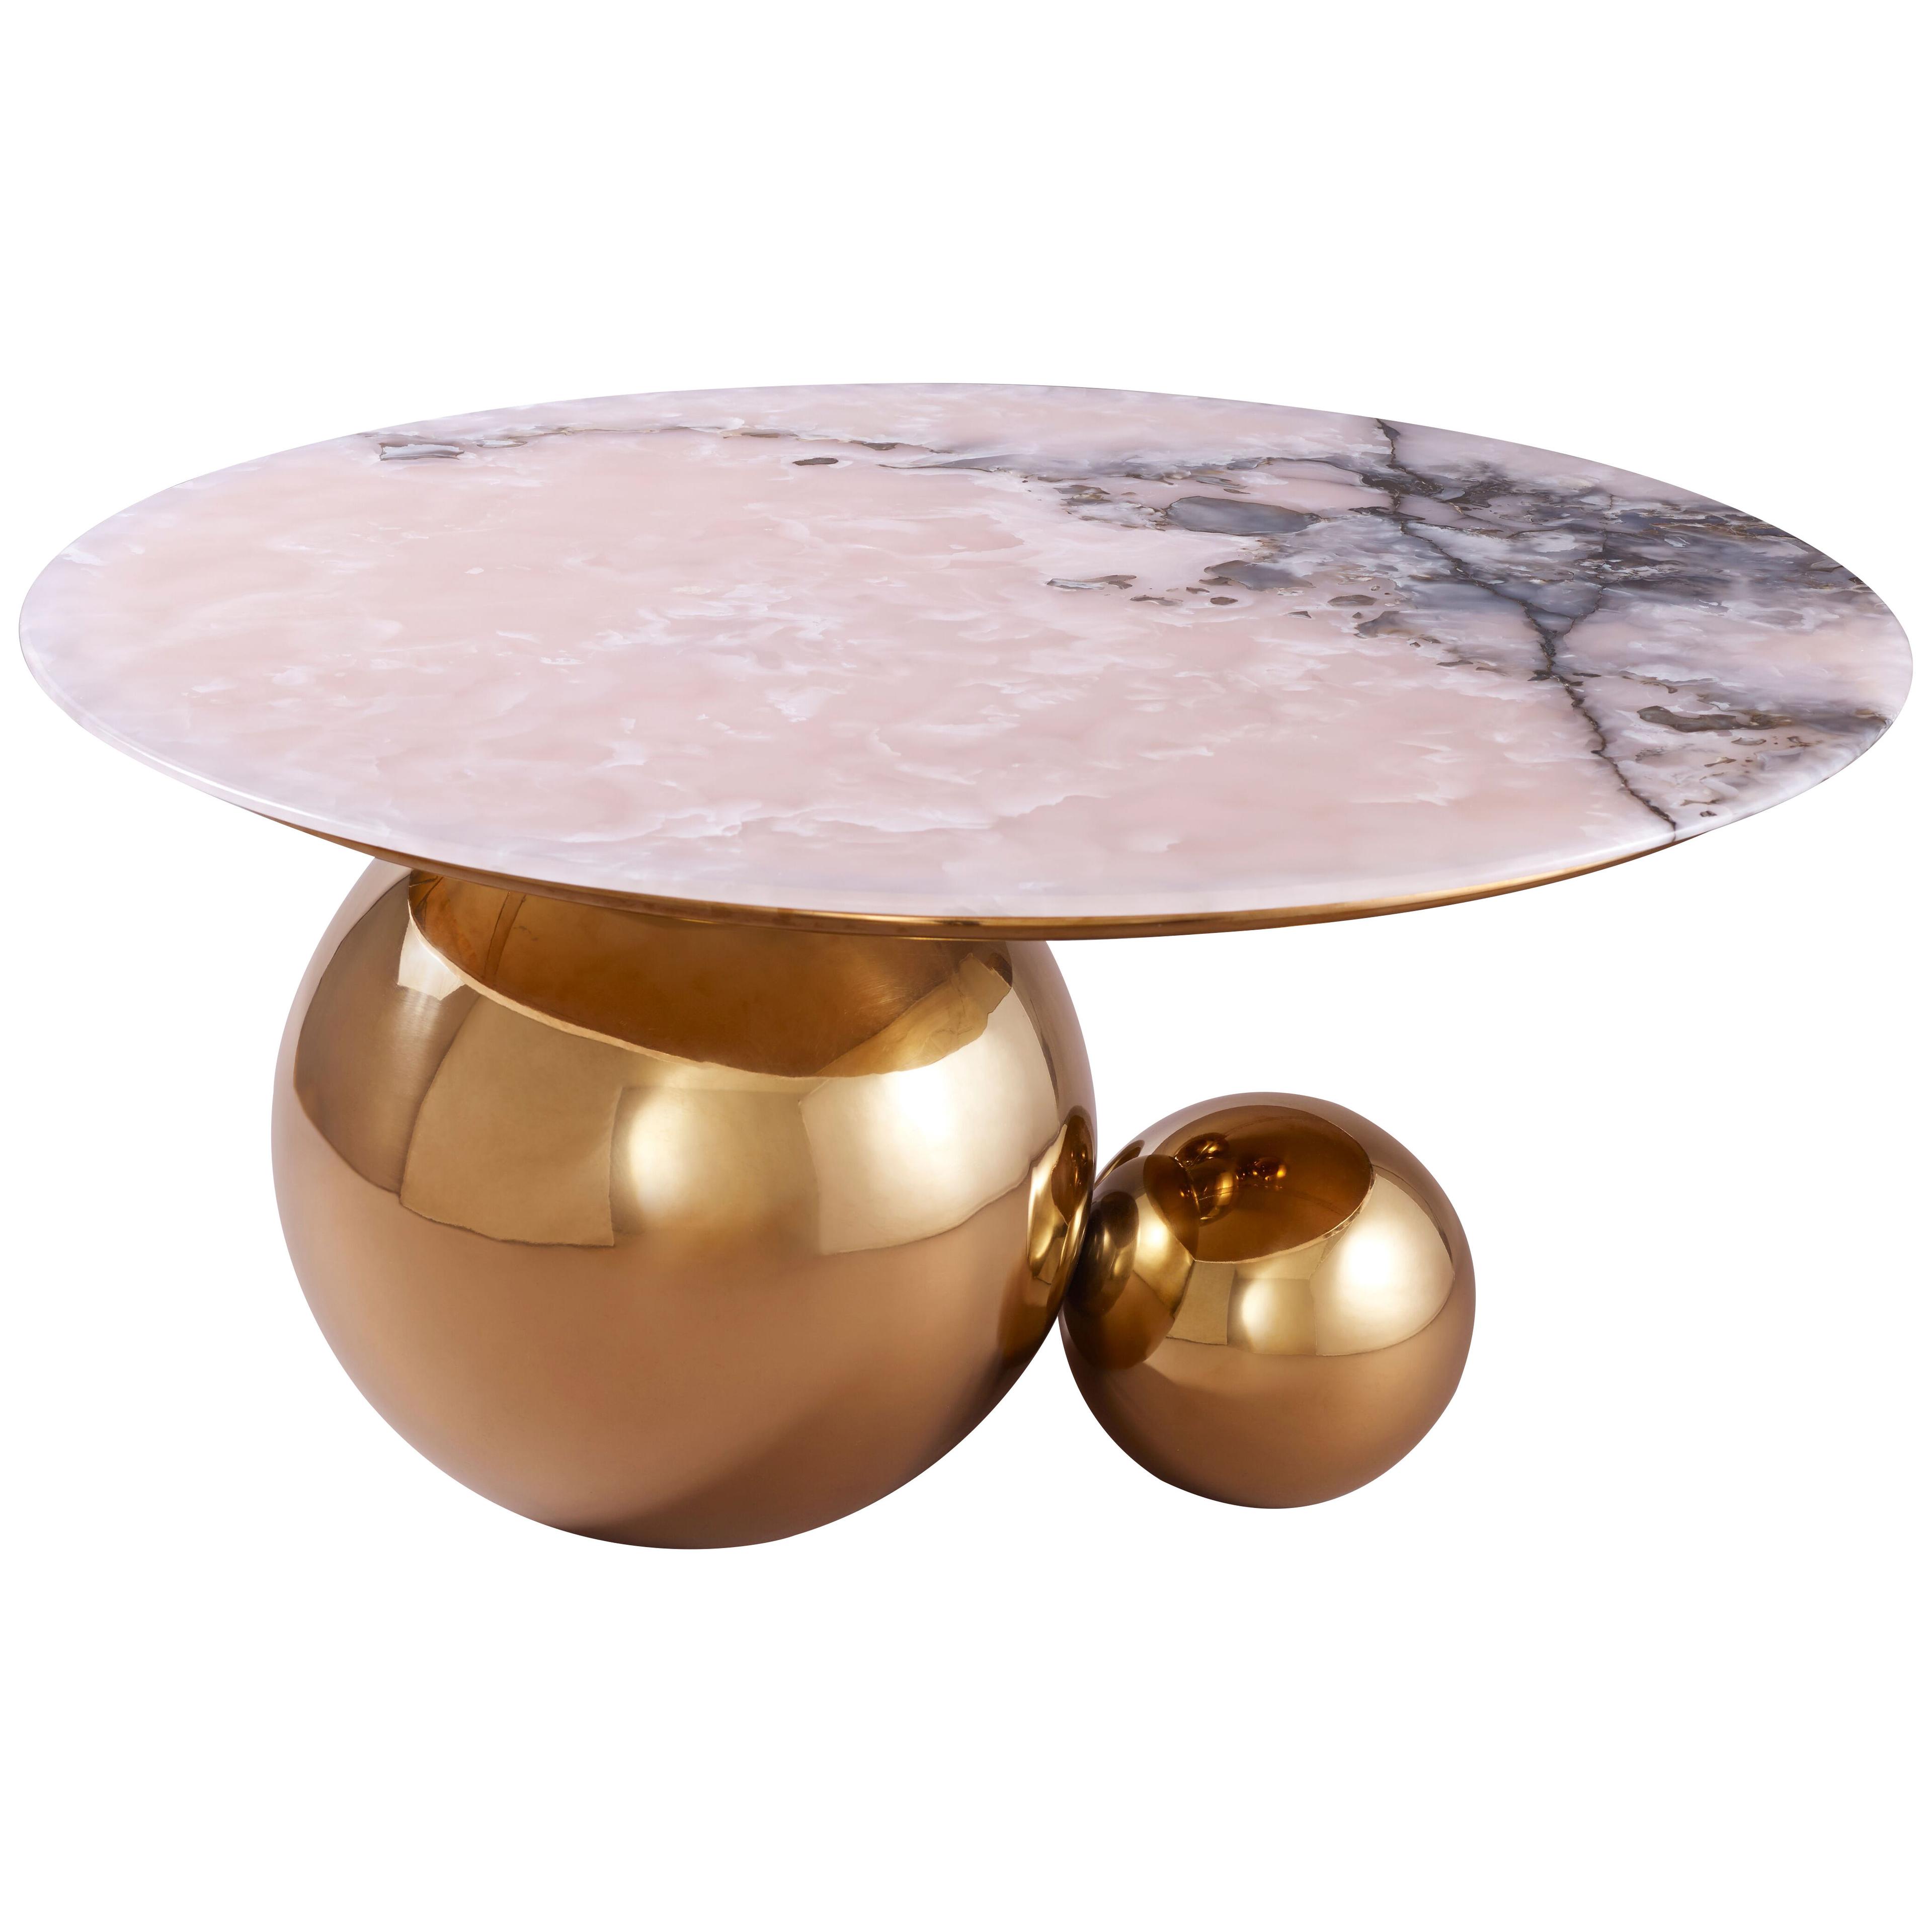 'JinShi' Coffee Table Featuring Pink Jade with a Rose-Gold Brass Tone Base 